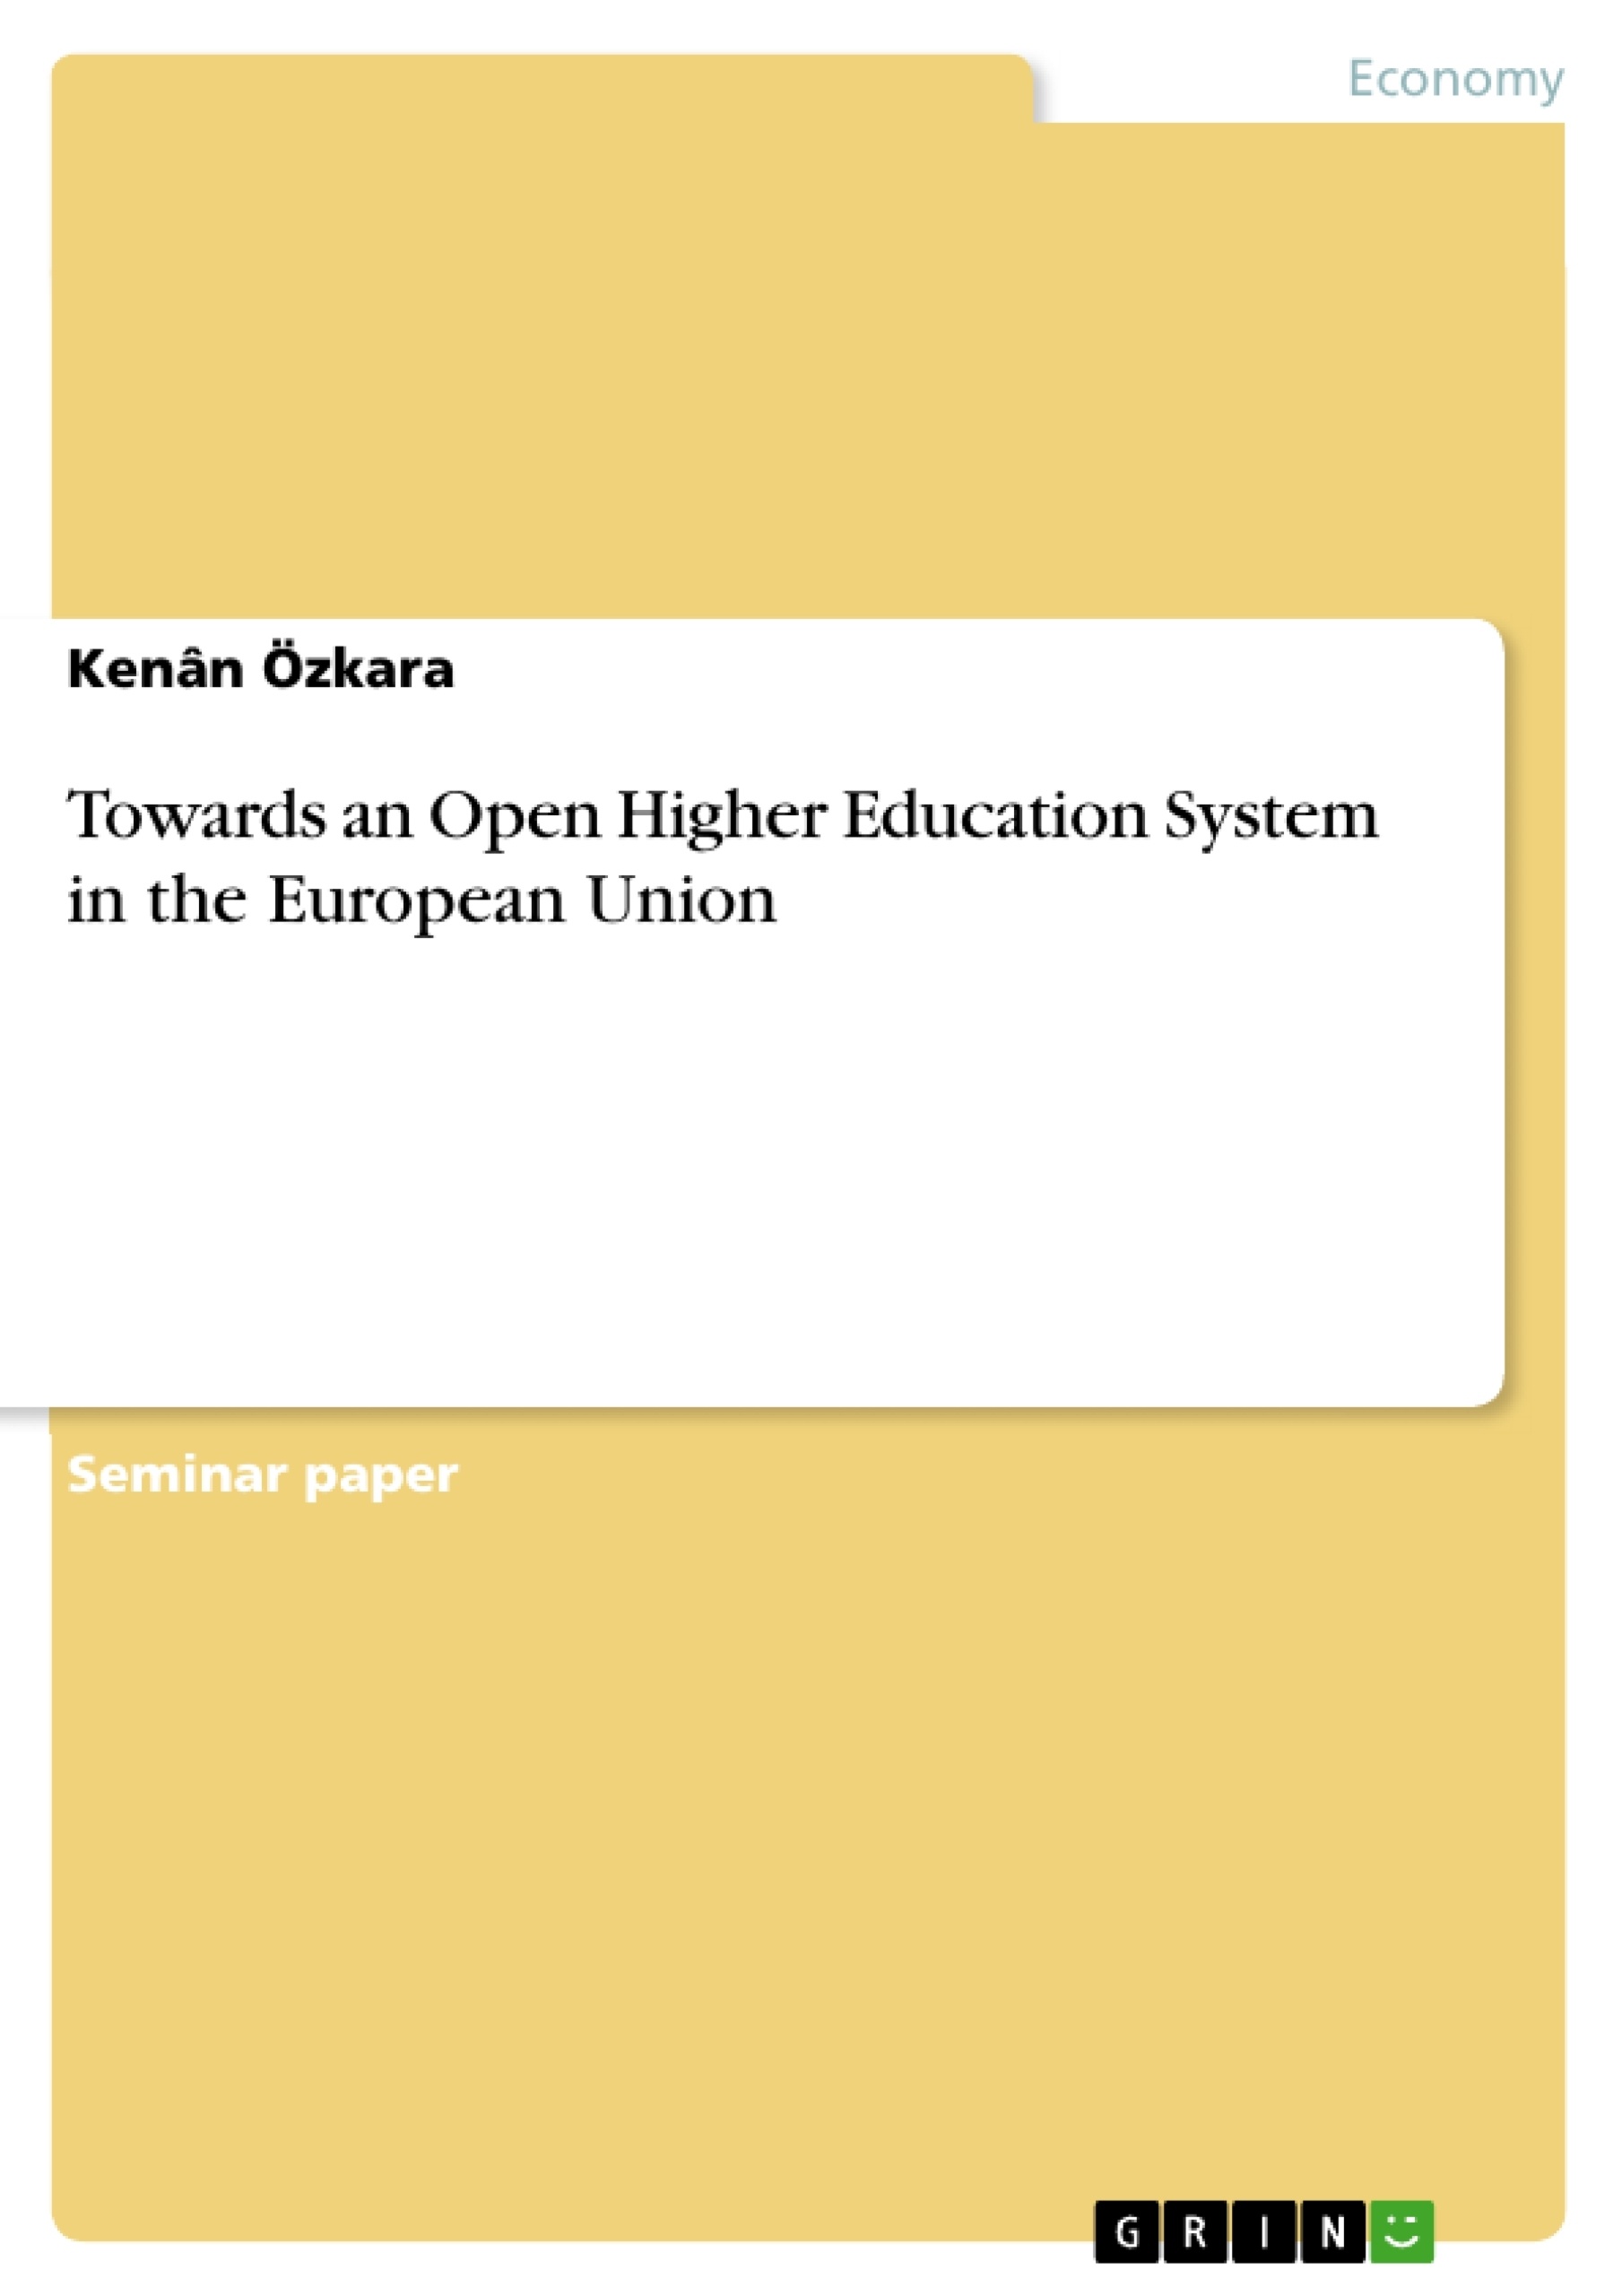 Title: Towards an Open Higher Education System in the European Union